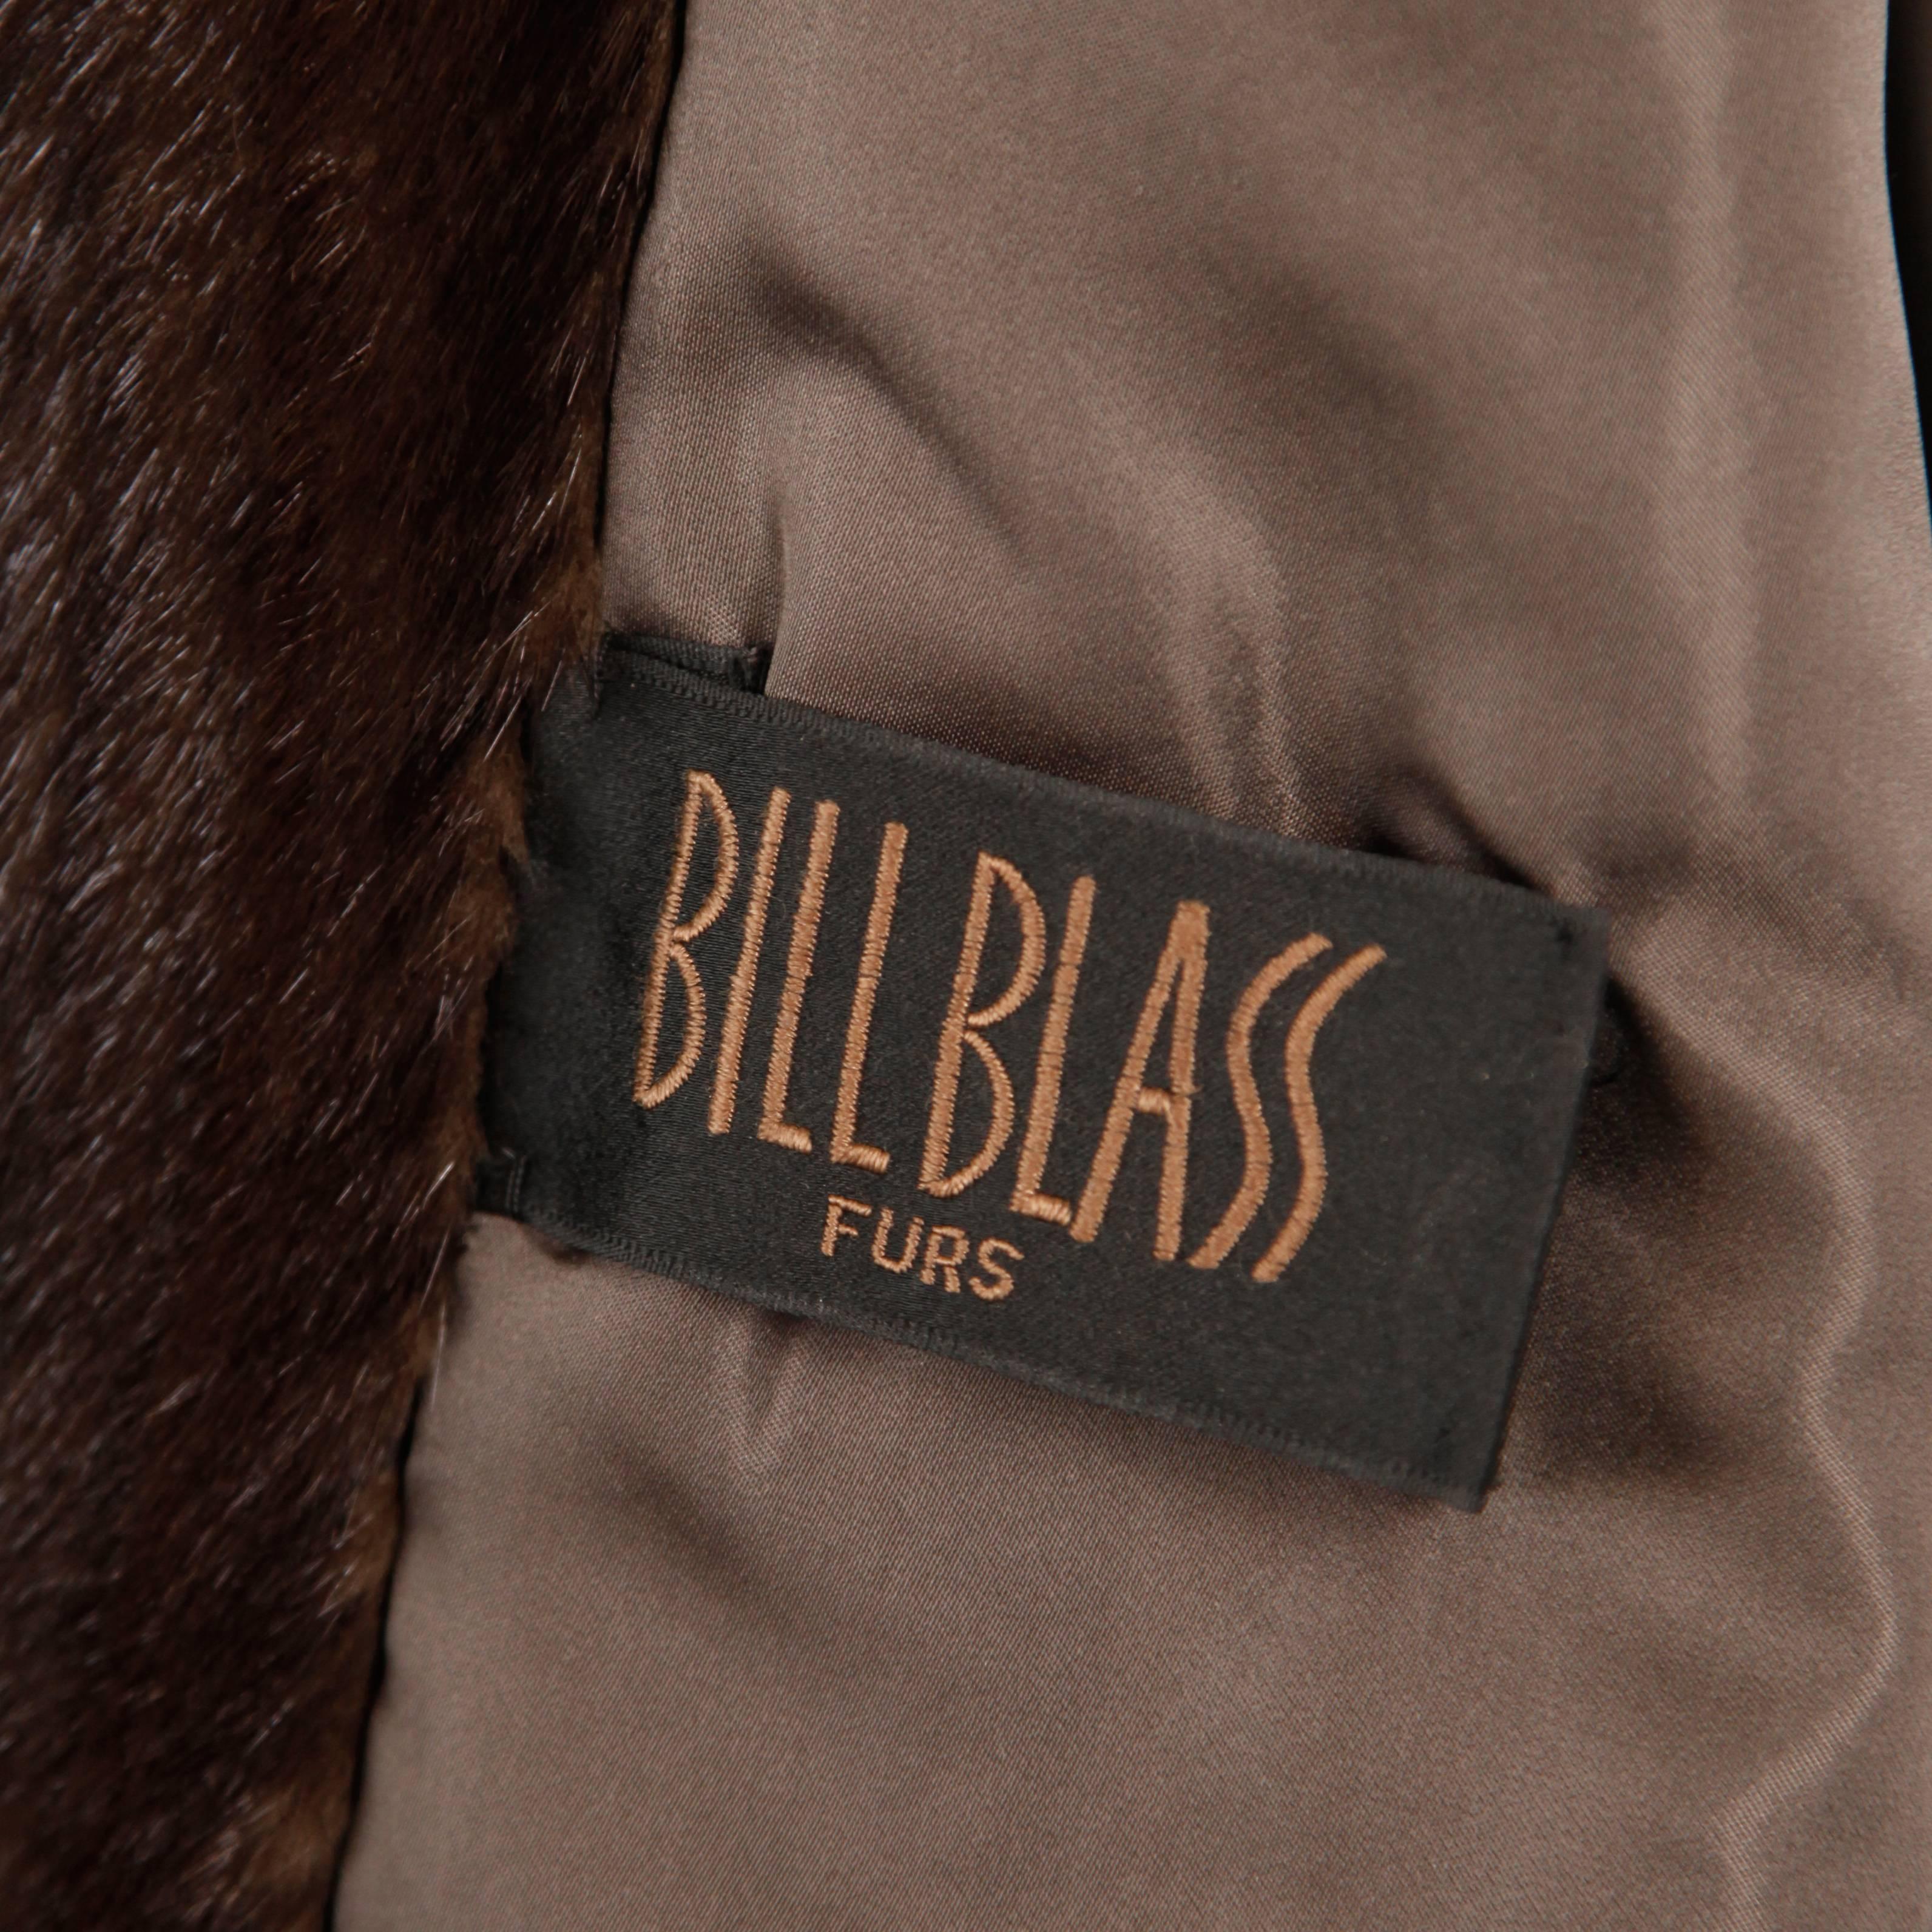 Absolutely stunning vintage brown mink fur jacket by Bill Blass. Pop up collar features fur on both sides. Sleeves are cuffed. Fully lined with no closure and monogram on the inside lining. Side pockets. Fits like a modern size medium-large. The